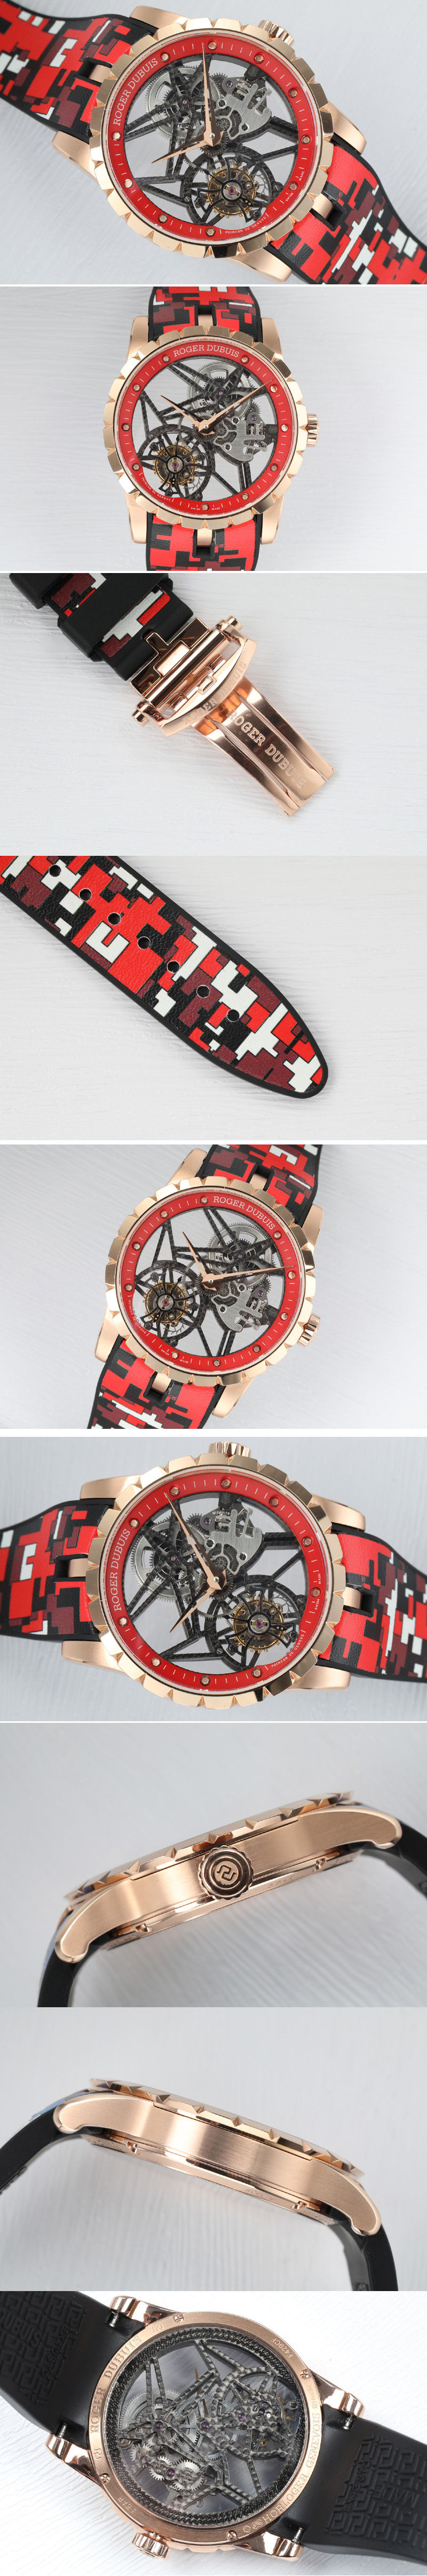 Replica Roger Dubuis Excalibur Rddbex0392 RG BBR Best Edition Skeleton Dial on Red Rubber Strap A2136 Tourbillon